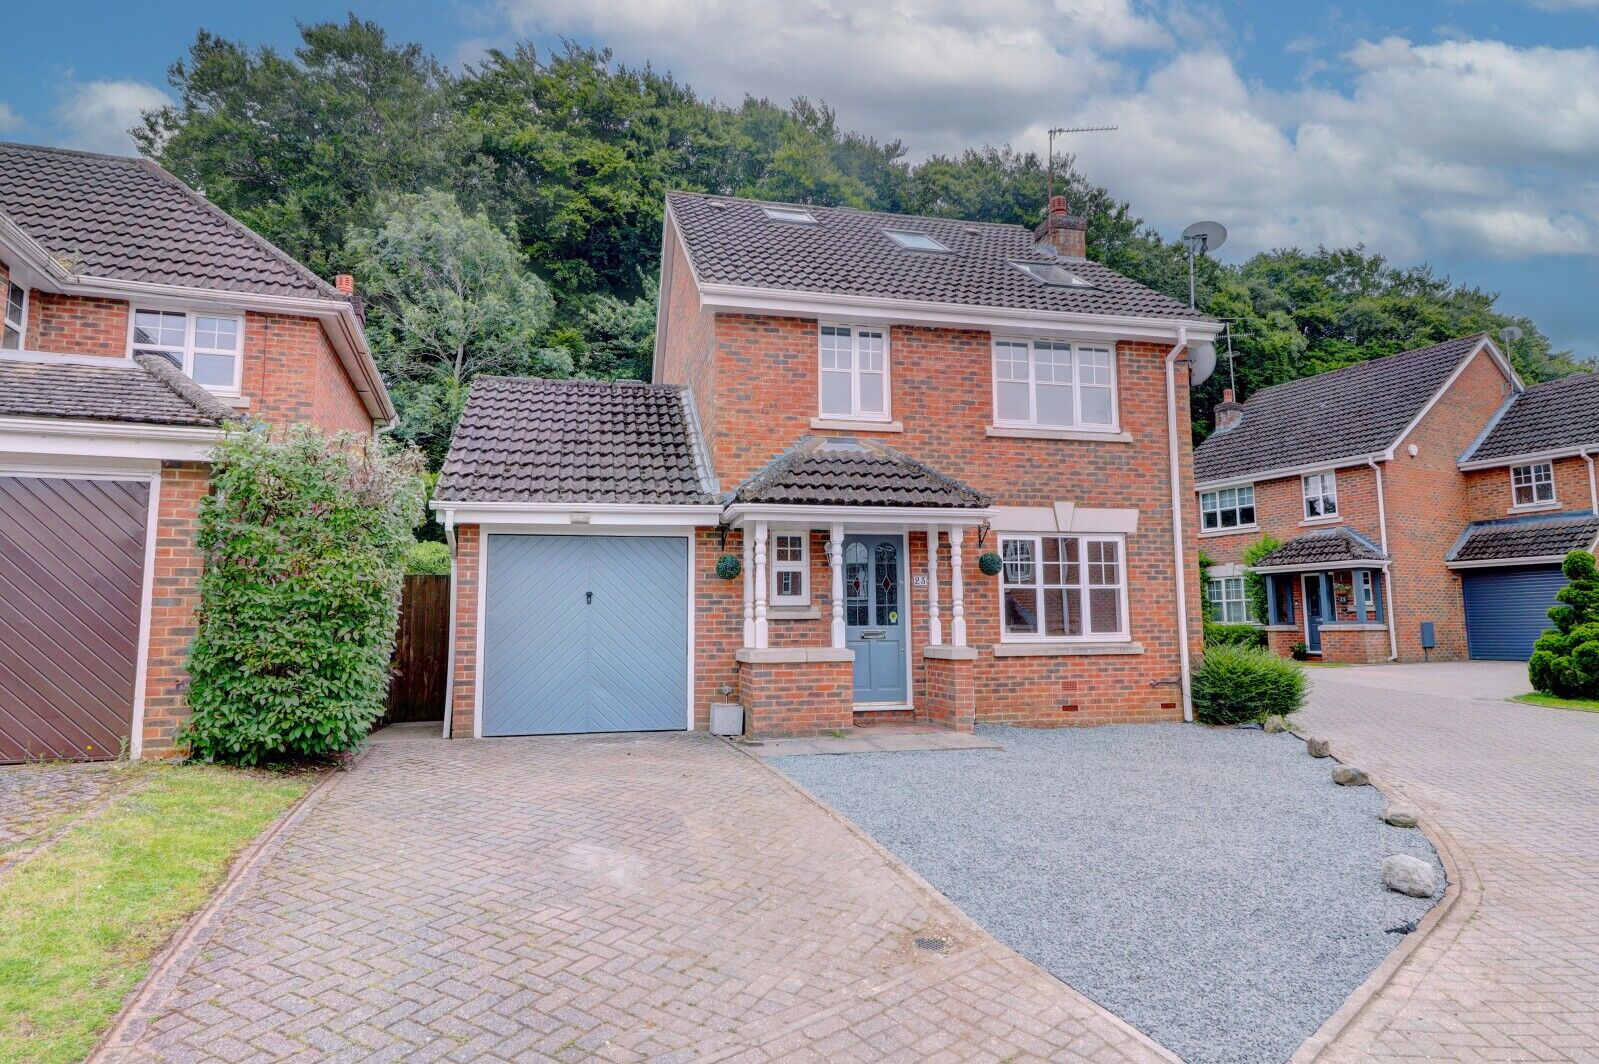 4 bedroom detached house to rent, Available now Badger Way, Hazlemere, HP15, main image